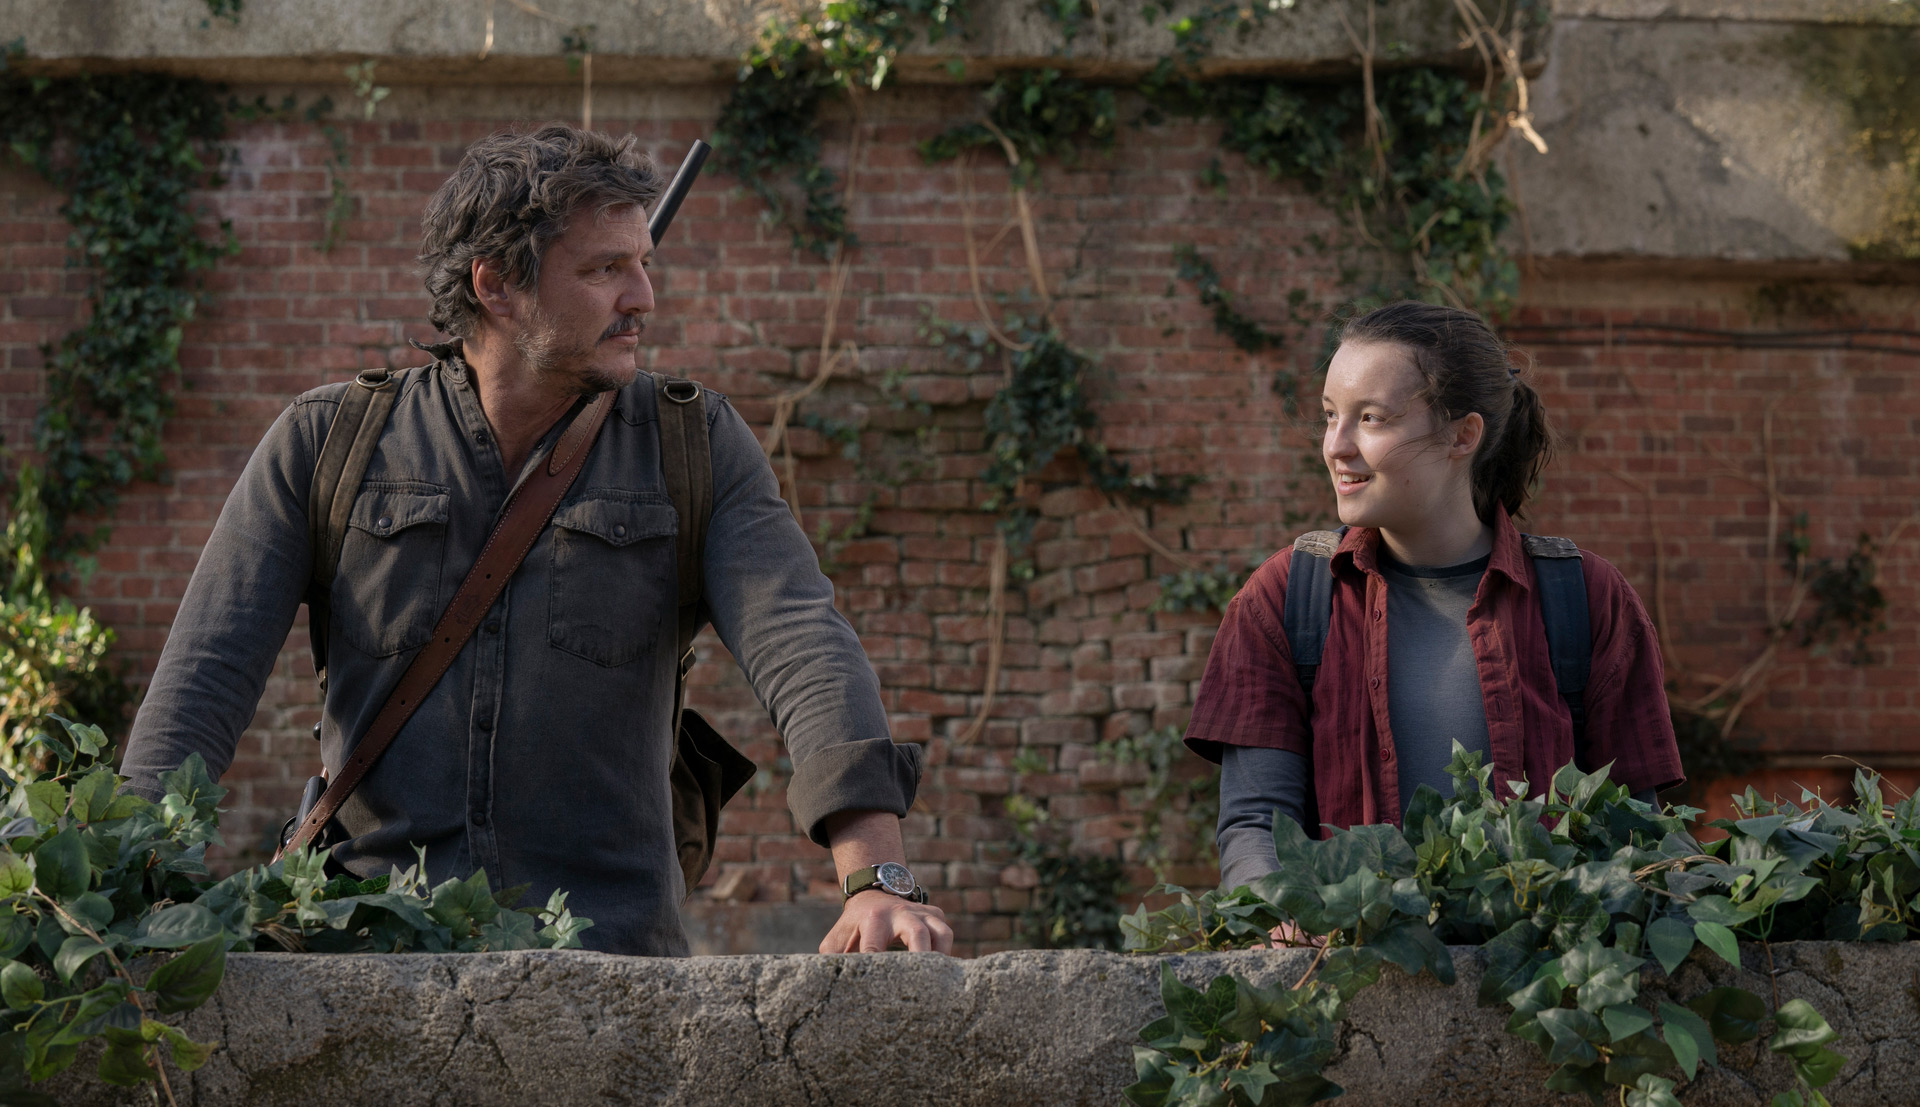 Pedro Pascal and Bella Ramsey in "The Last of Us"